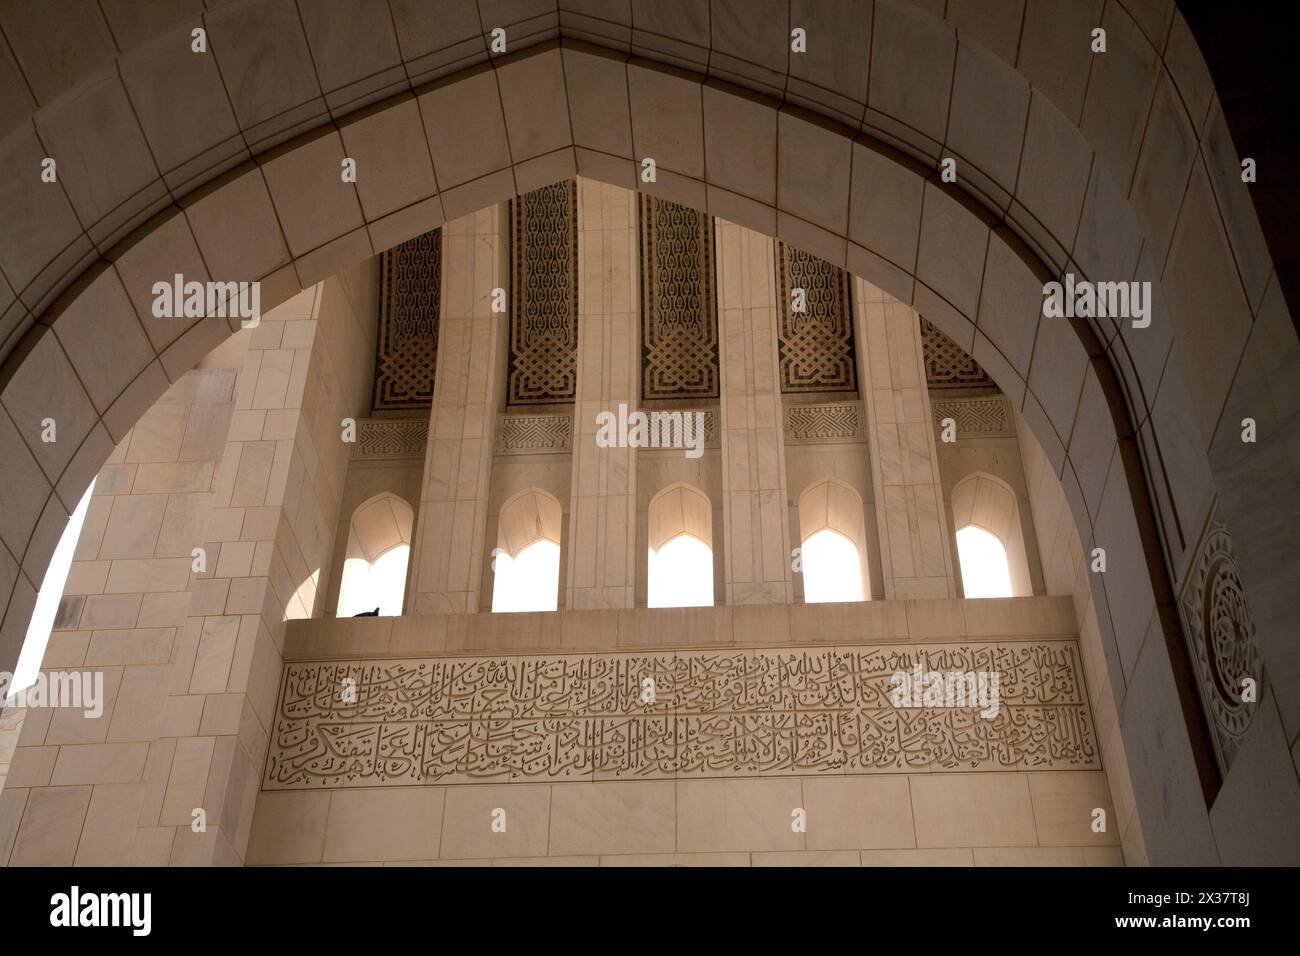 archway with rabic script sultan qaboos grand mosque muscat oman middle east Stock Photo